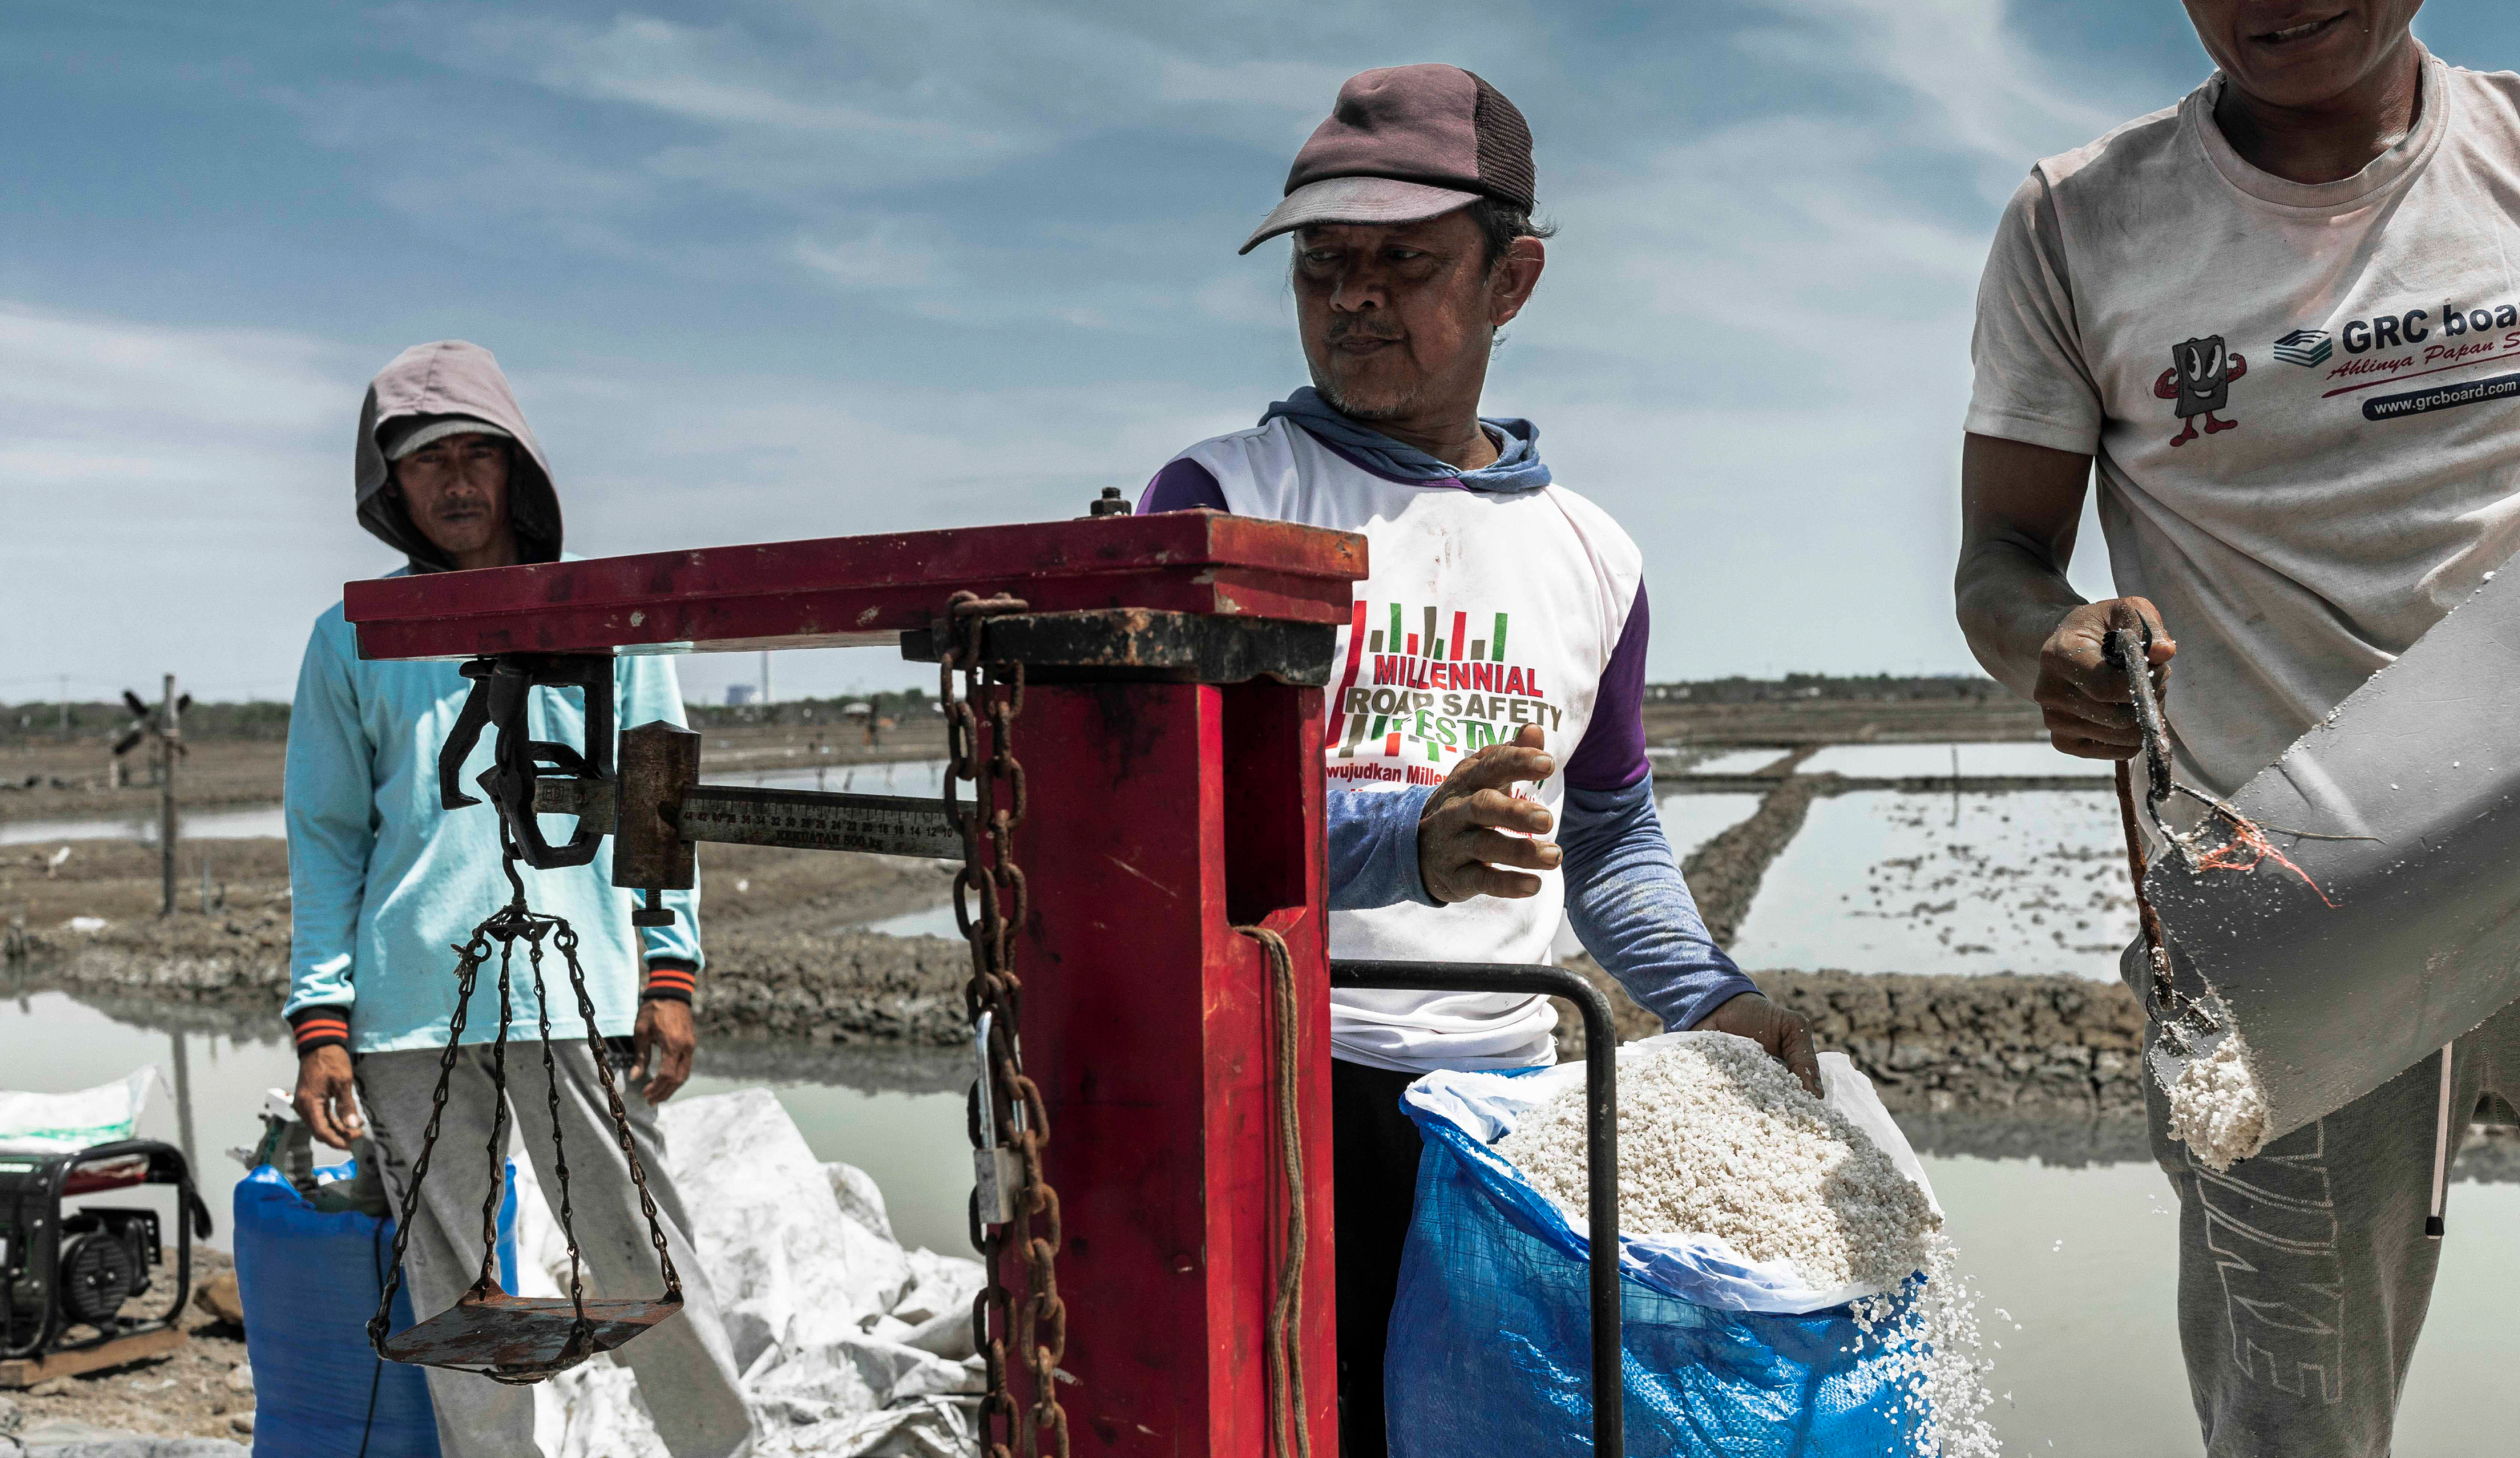 A group of men weighing and bagging a salt harvest in the village of Rawaurip, Cirebon. Salt production has fallen alarmingly in the last three years due to seawater flooding and unpredictable weather. ©Irene Barlian for VII Academy Fellows